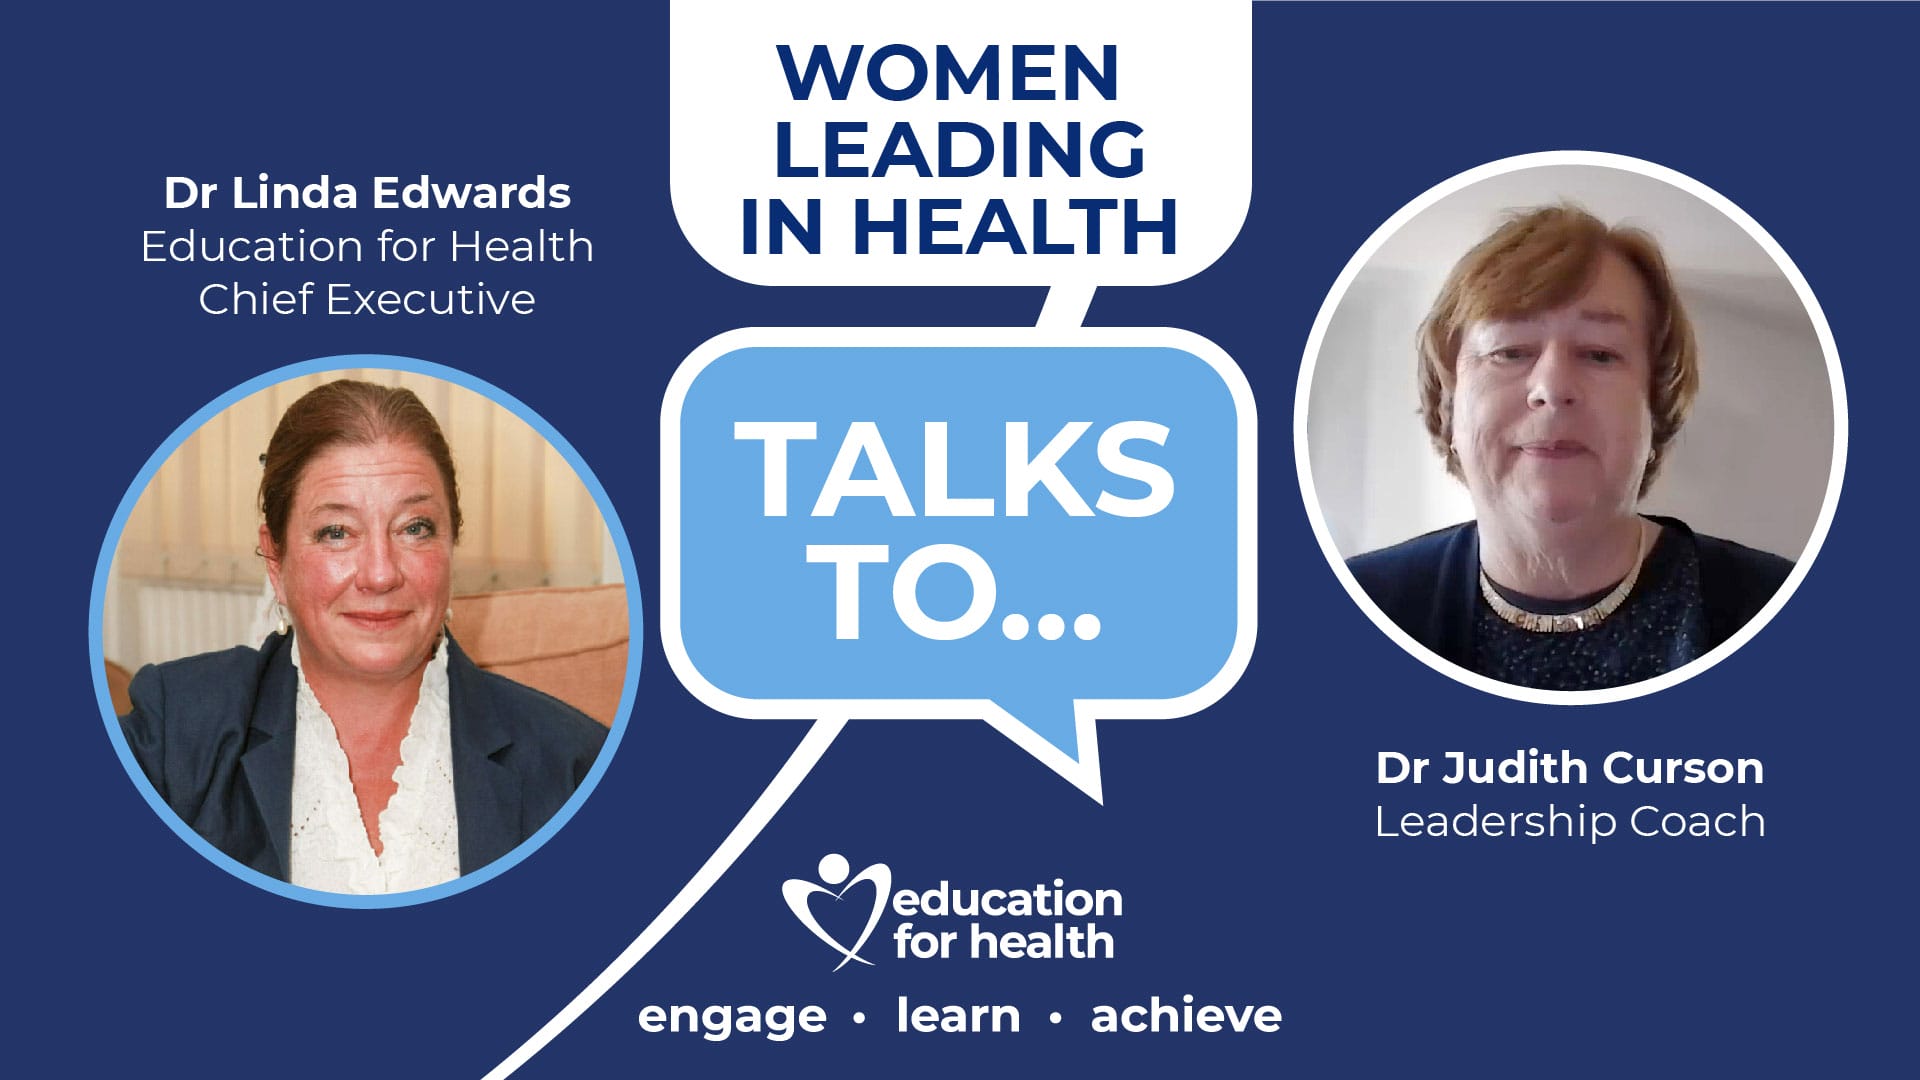 Women who have found there leader within - Dr Judith Curson Interview